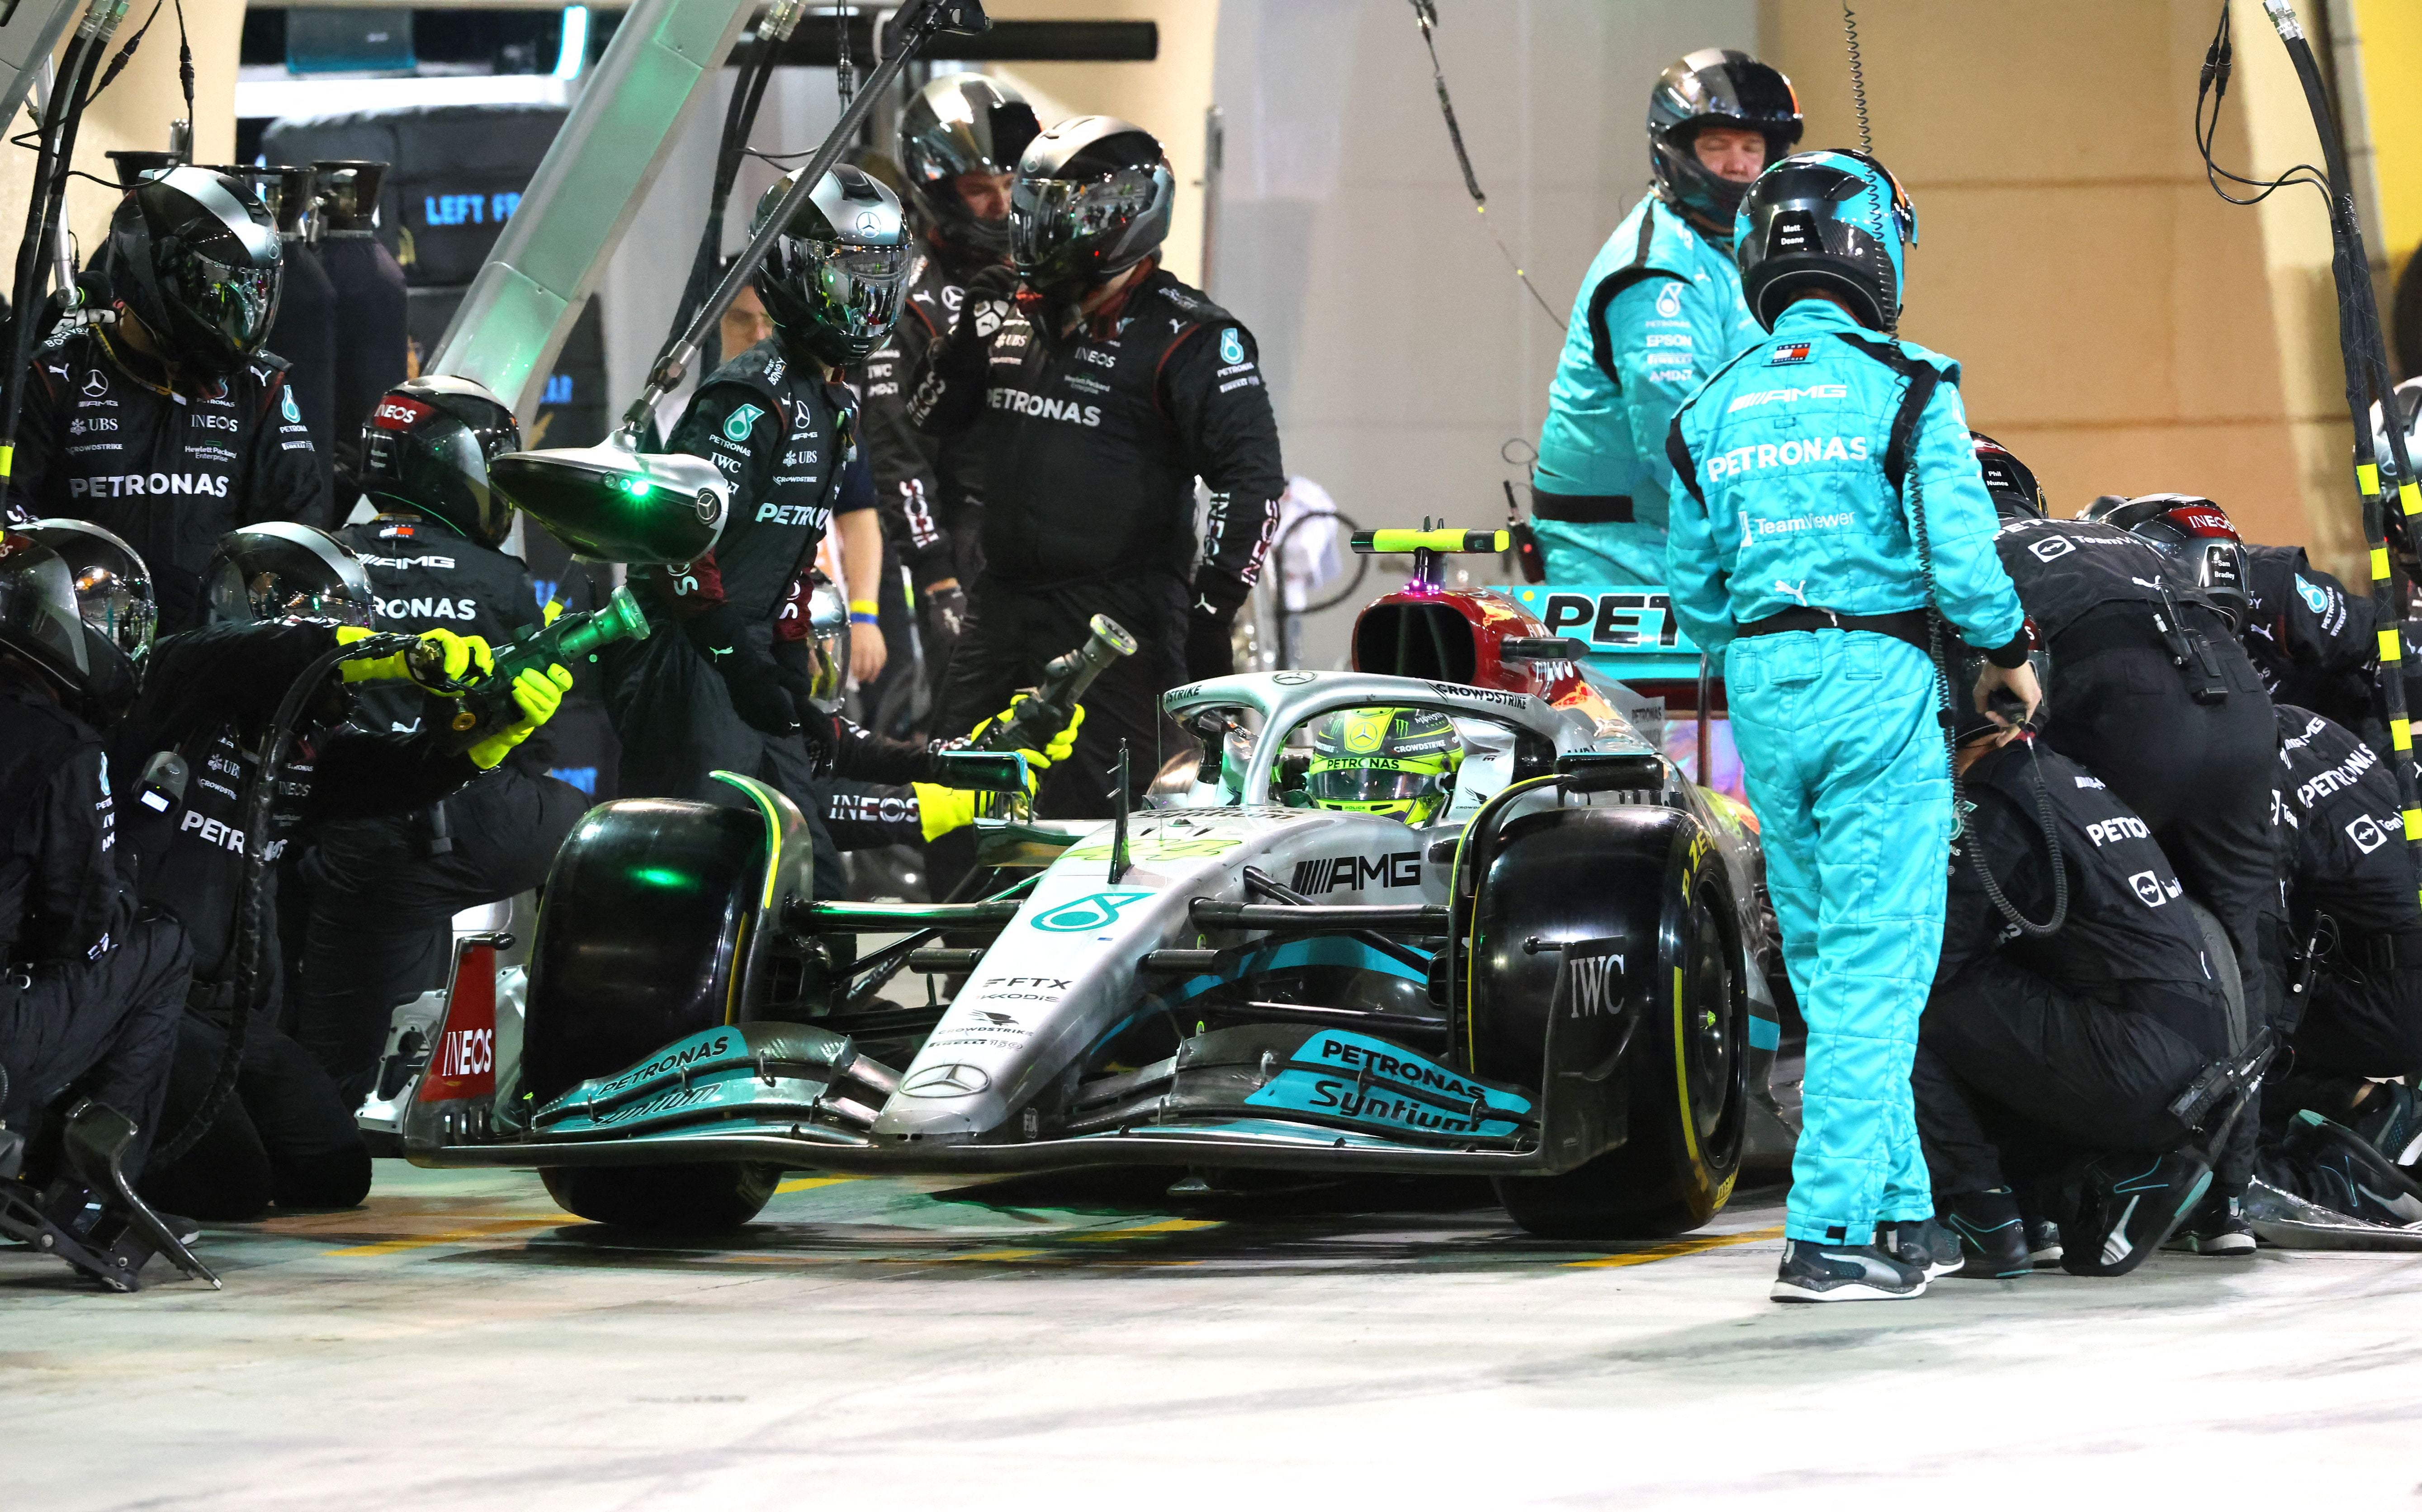 Mercedes struggled with their pit stops in Bahrain and Wolff has demanded improvement